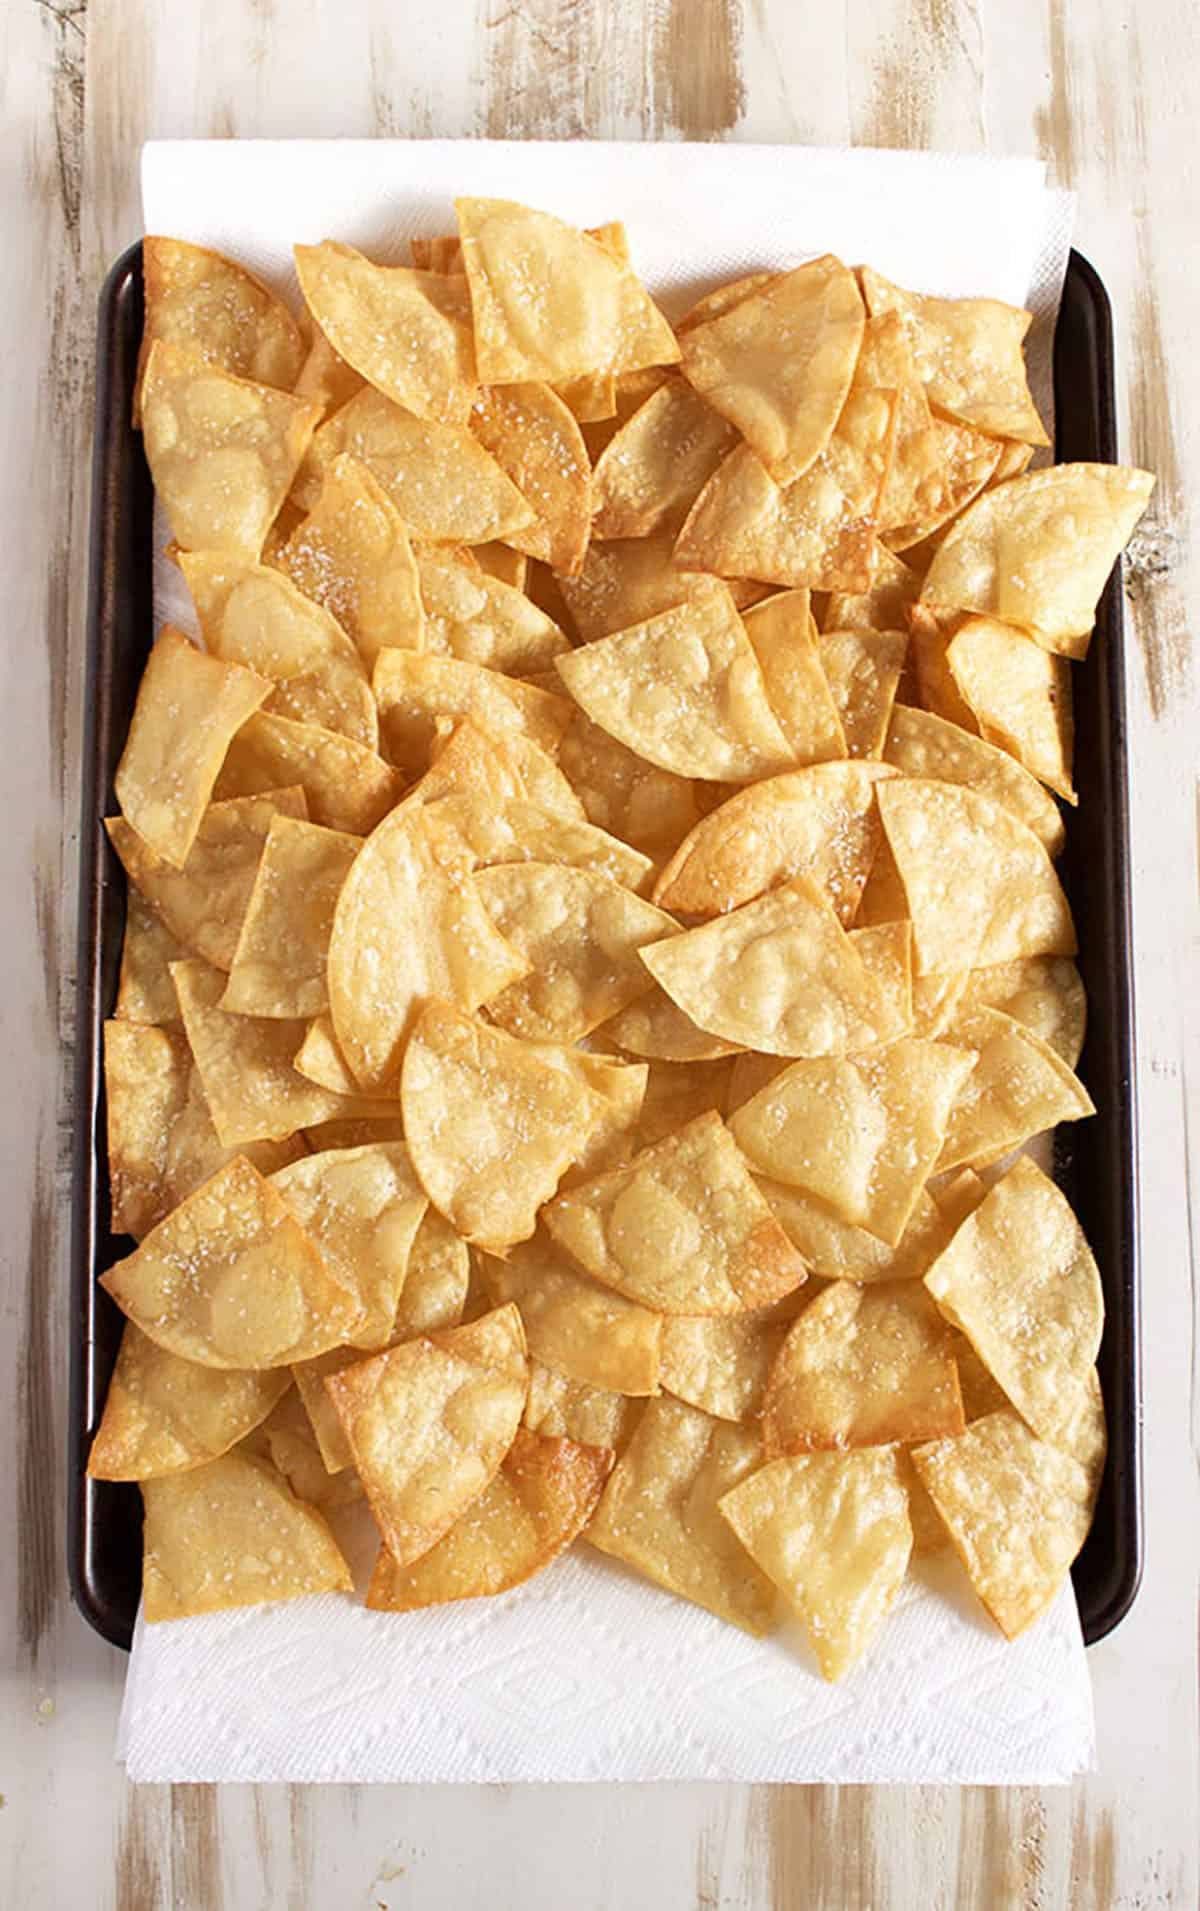 Tortilla chips on a baking sheet with a paper towel under them.